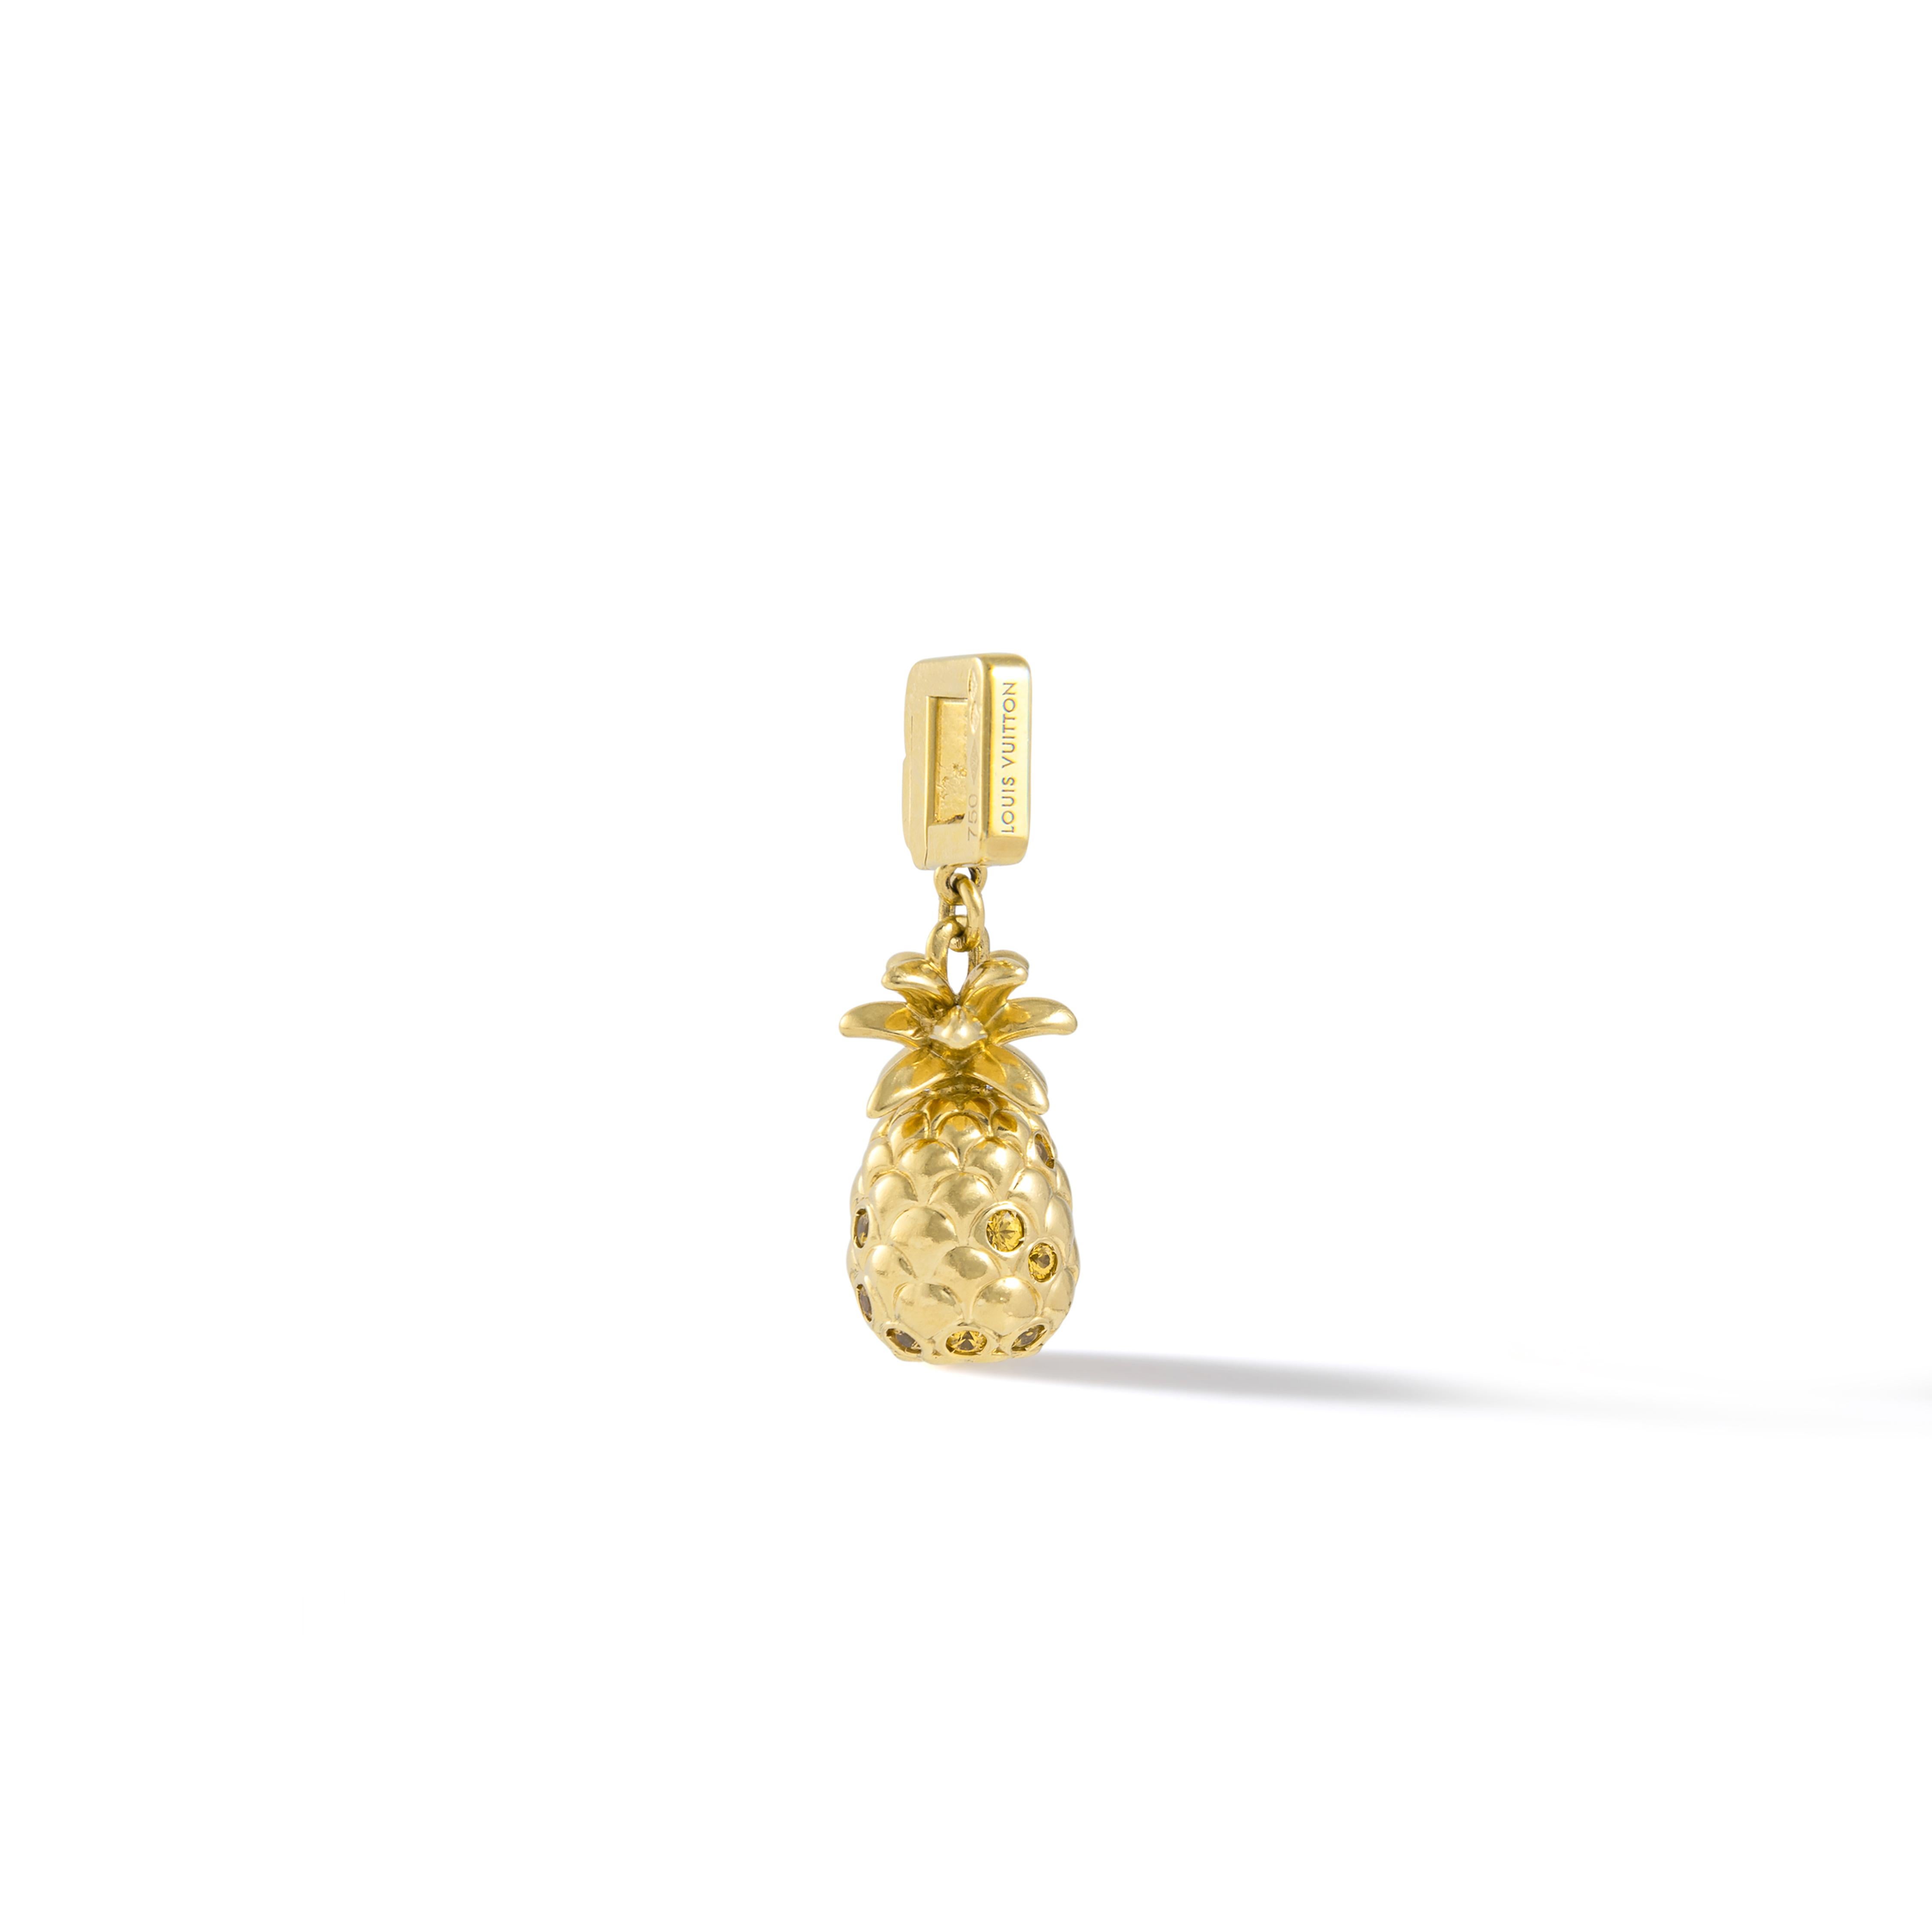  LOUIS VUITTON Pineapple motif Sapphire Pendant charm Yellow Gold 18K YG 750 90054084.
Yellow Sapphire.
Made in FRANCE. Signed Louis Vuitton, numbered and marked.

Total height: 1.38 inch (3.50 centimeters).